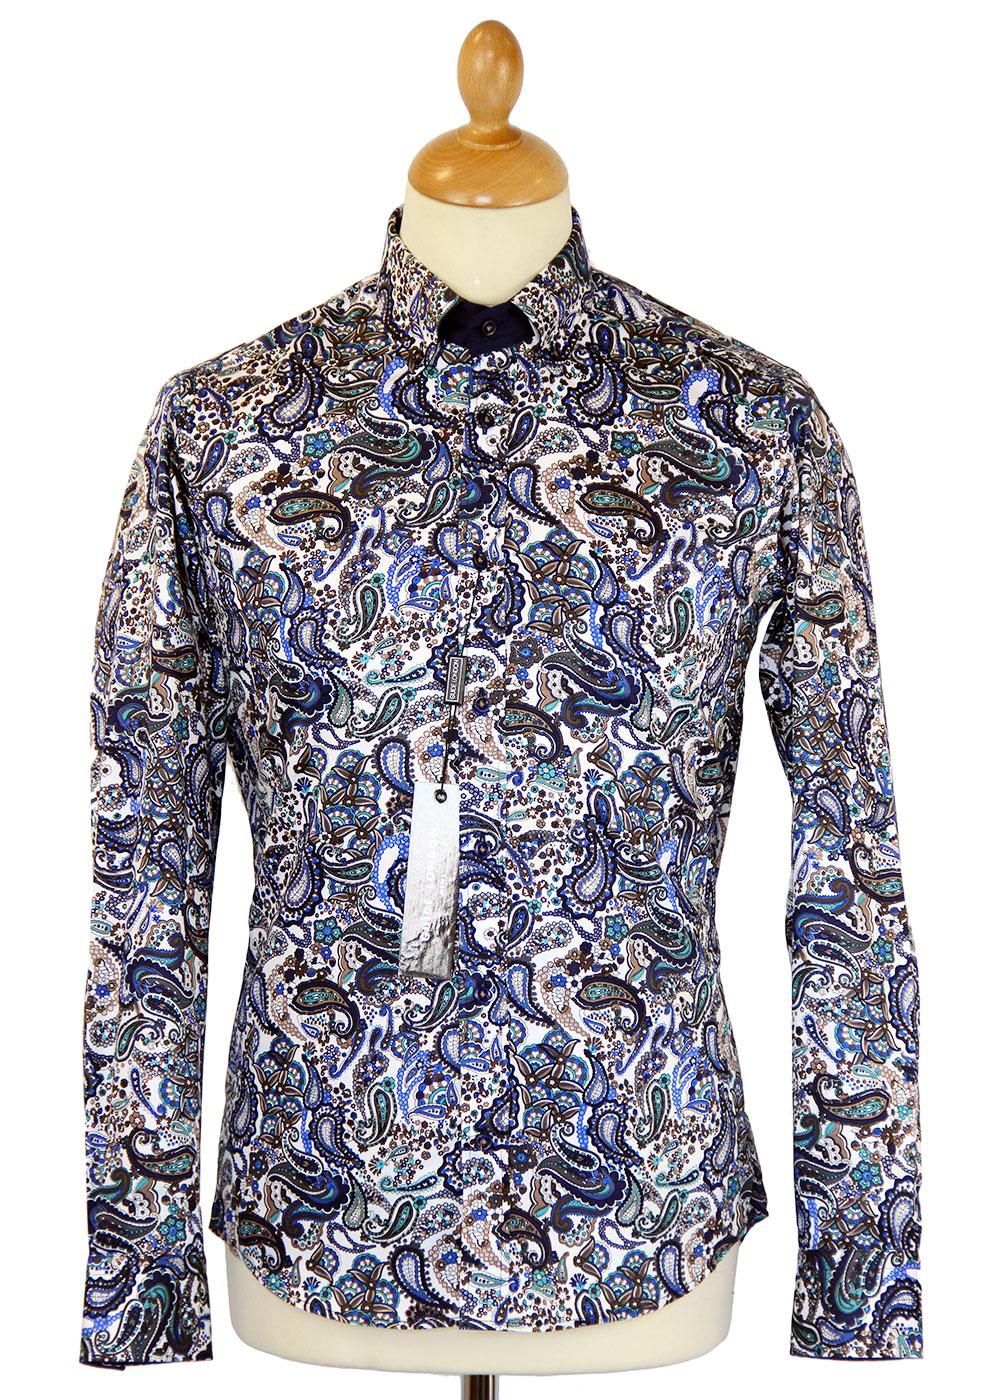 GUIDE LONDON Floral Multi Paisley Retro 60s Mod Shirt in Navy